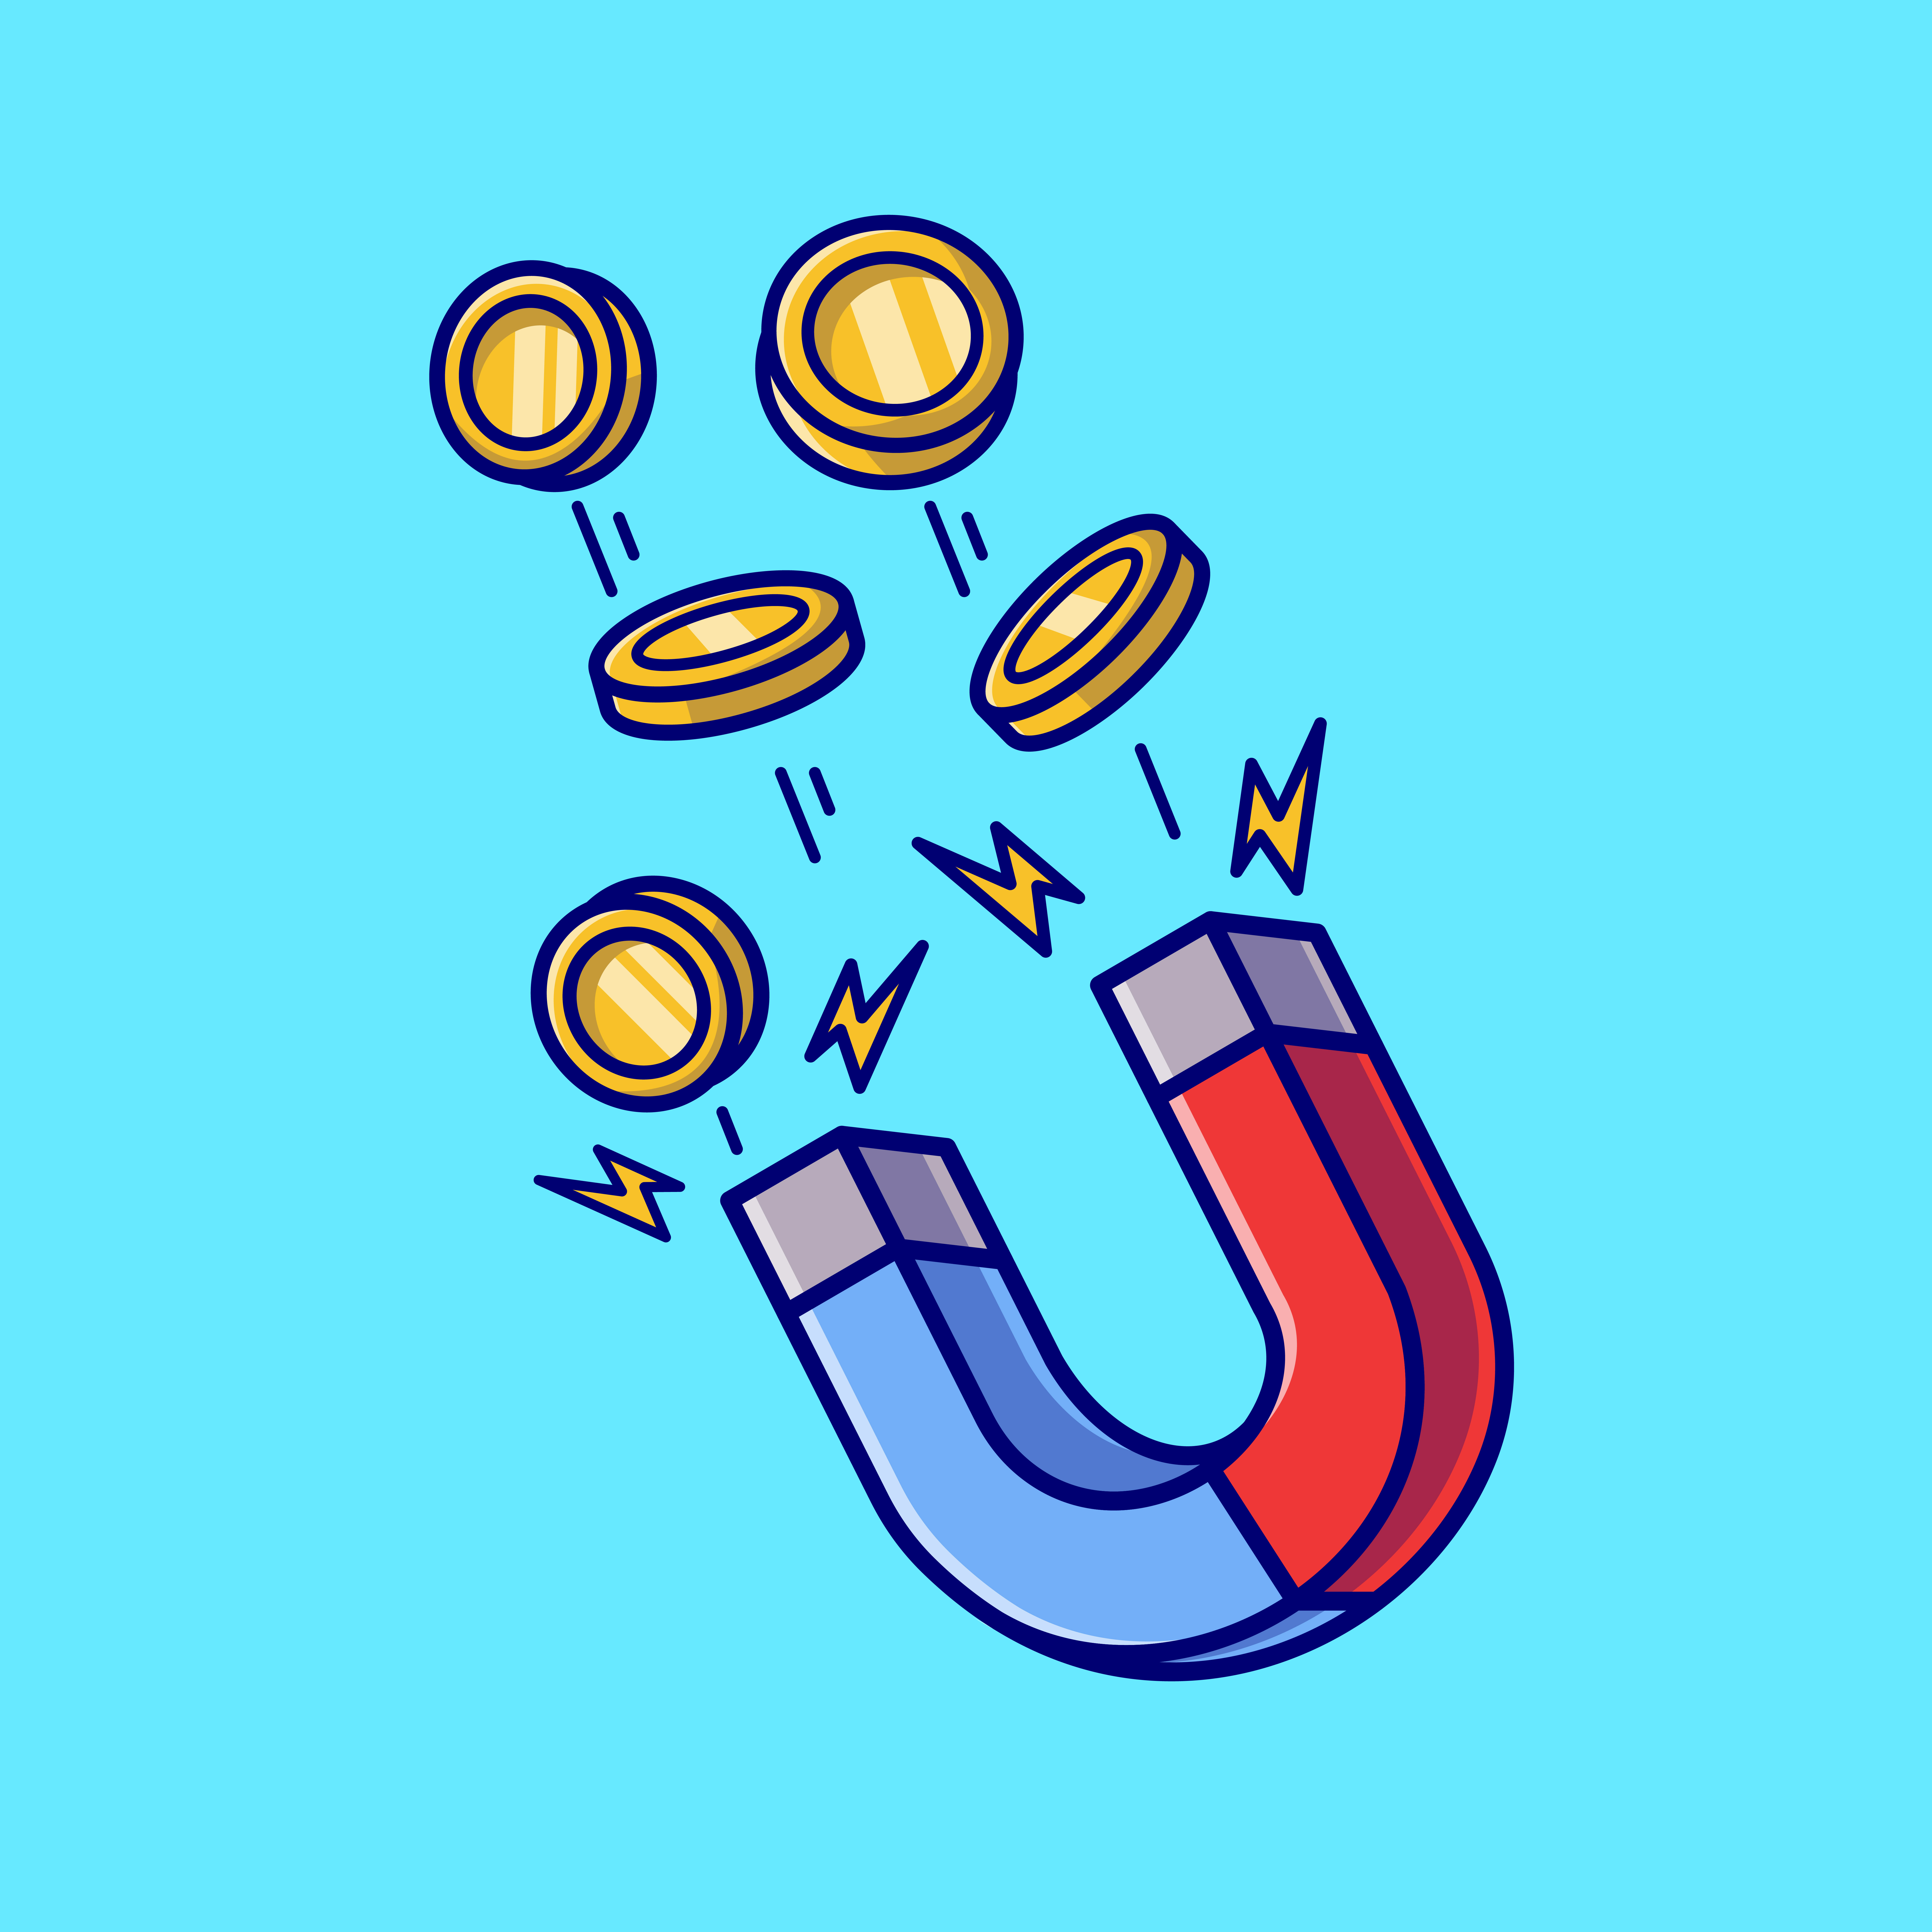 Illustration of a magnet withs coins attaching itself to the magnet.